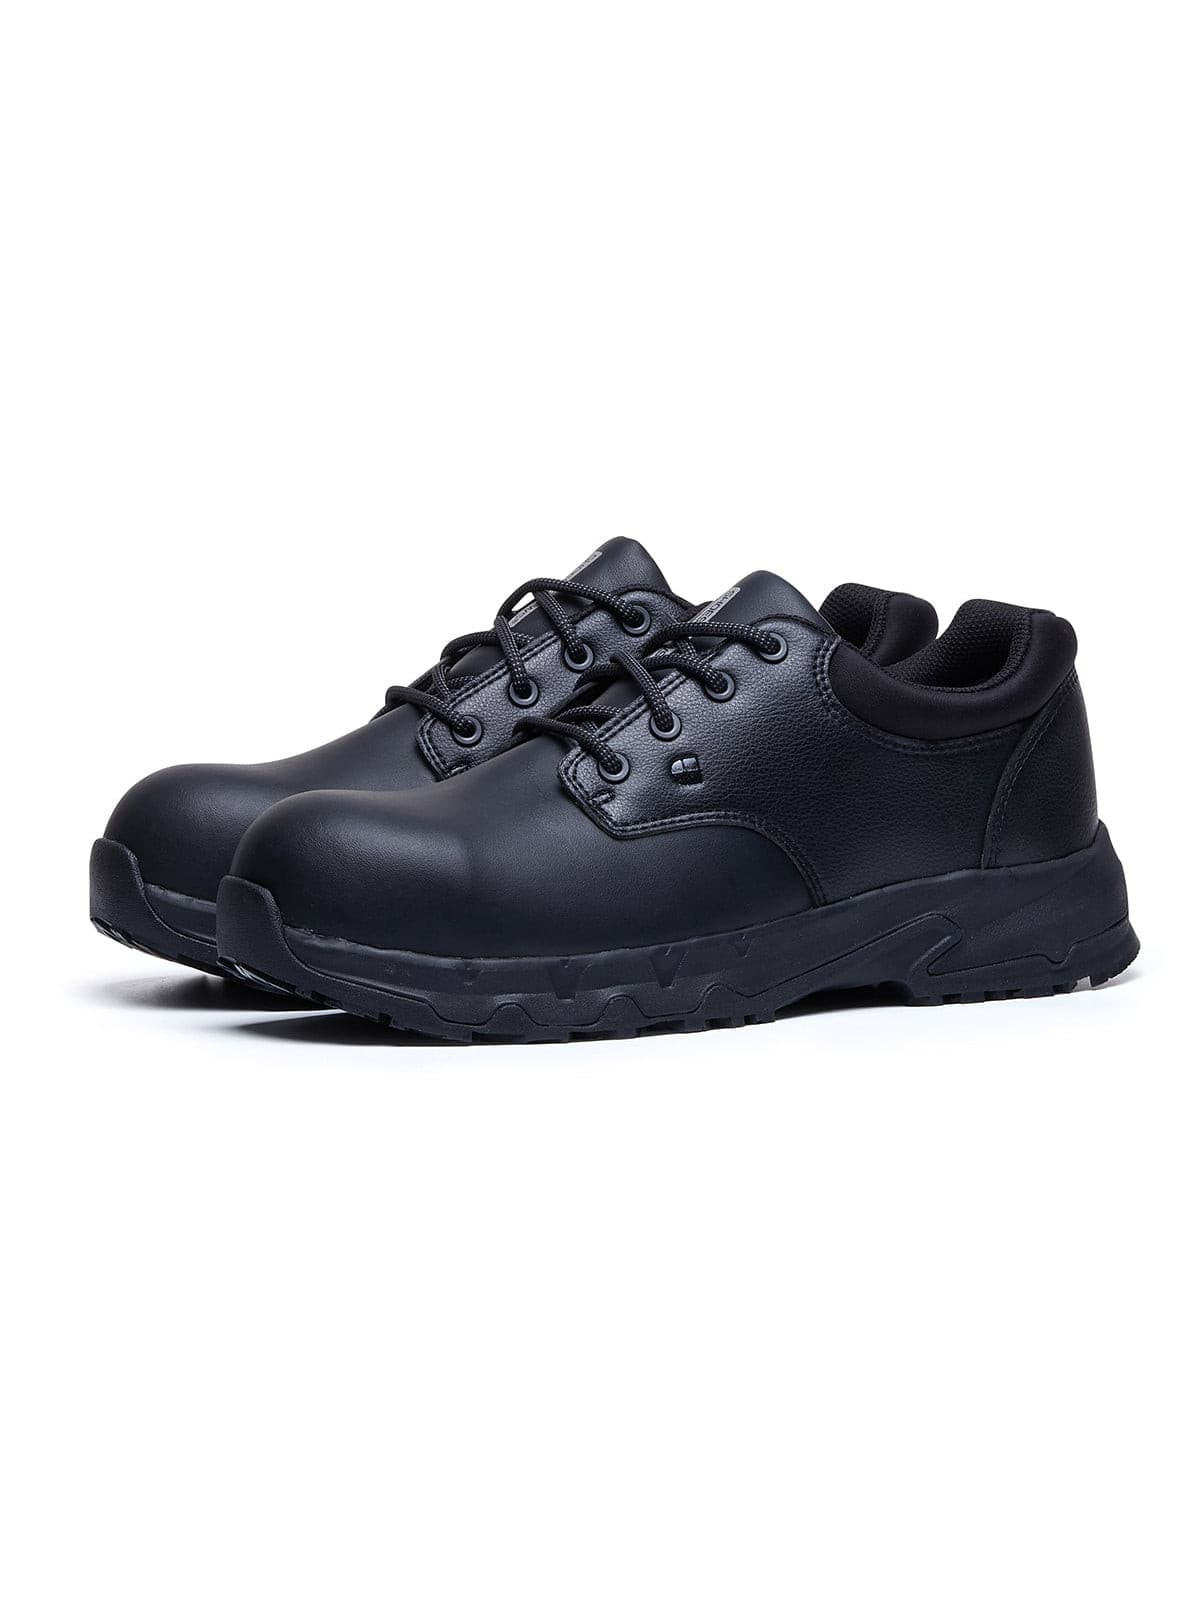 Unisex Safety Shoe Barra (S3) by  Safety Shoes.